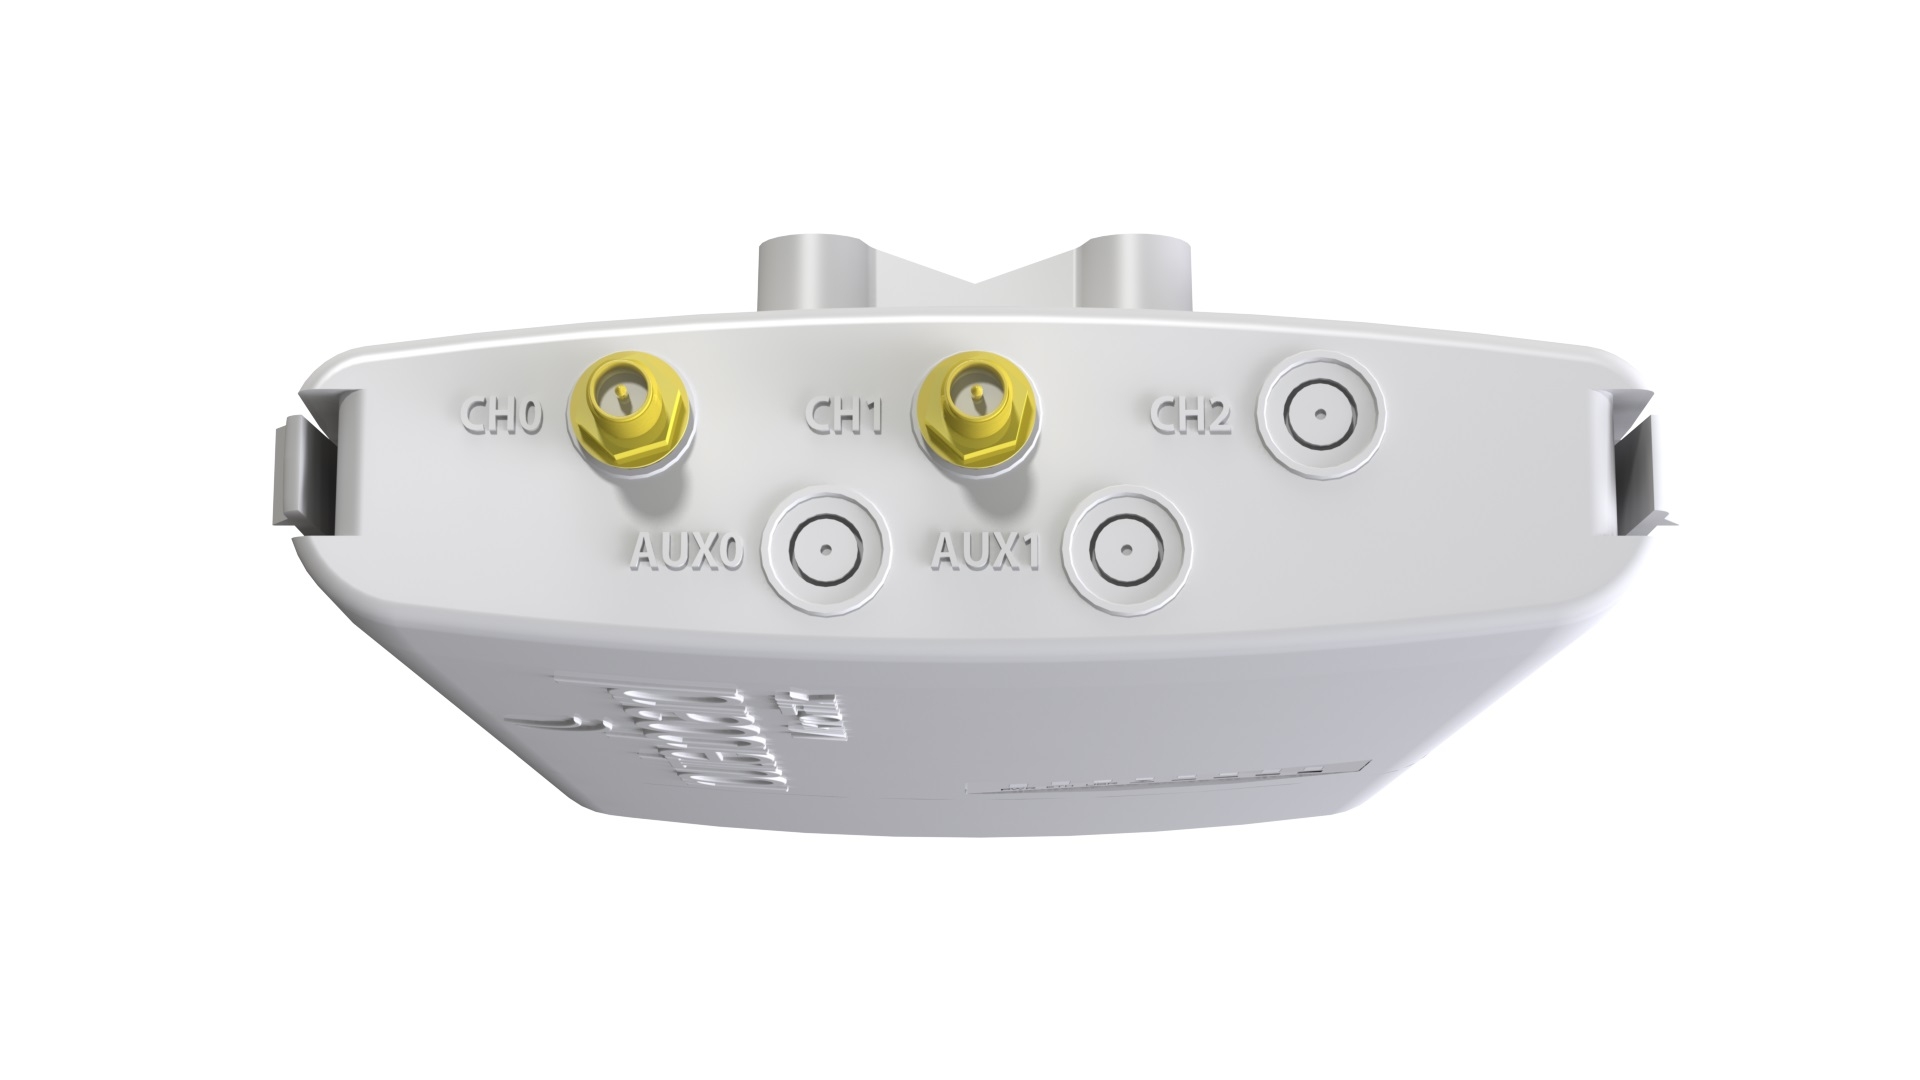 MikroTik RB912UAG-6HPnD-OUT Basebox 6 Wireless Outdoor CPE